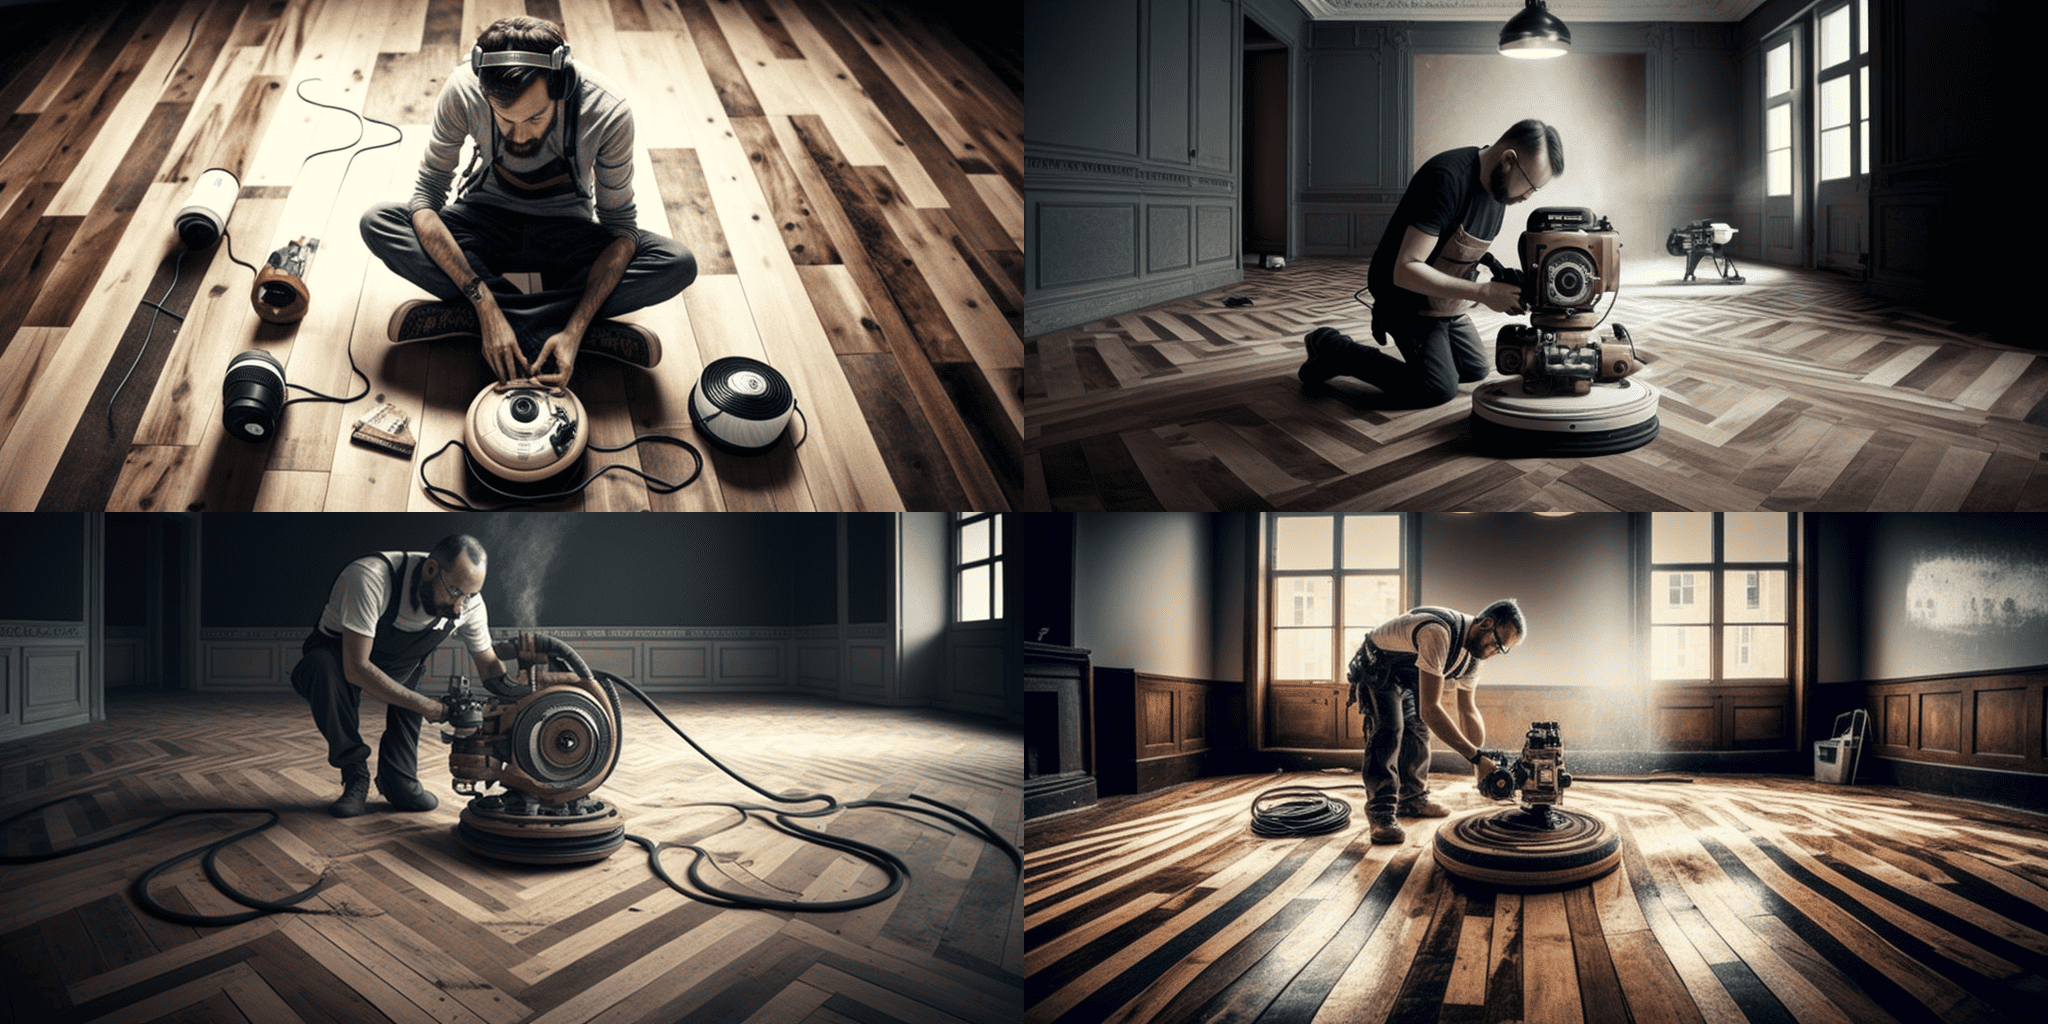 kevin34 man working on parquet with a belt polisher on wooden f 8dab472f 5bfb 400f 8ca8 7e608d016c45